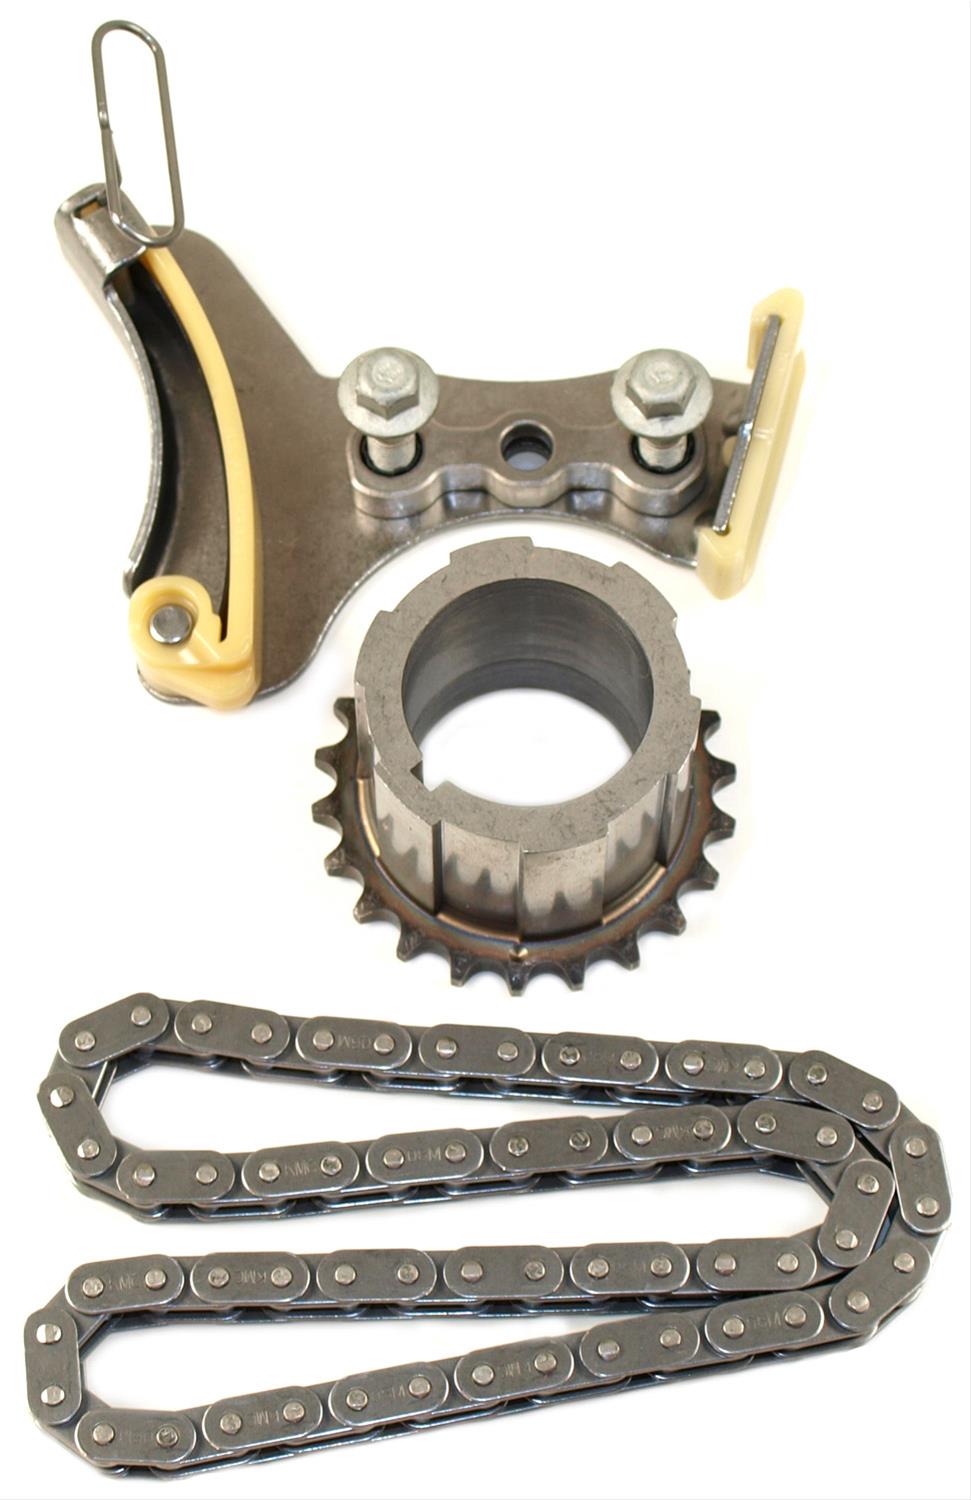 Timing Chain Cloyes Gear & Product 9-4205